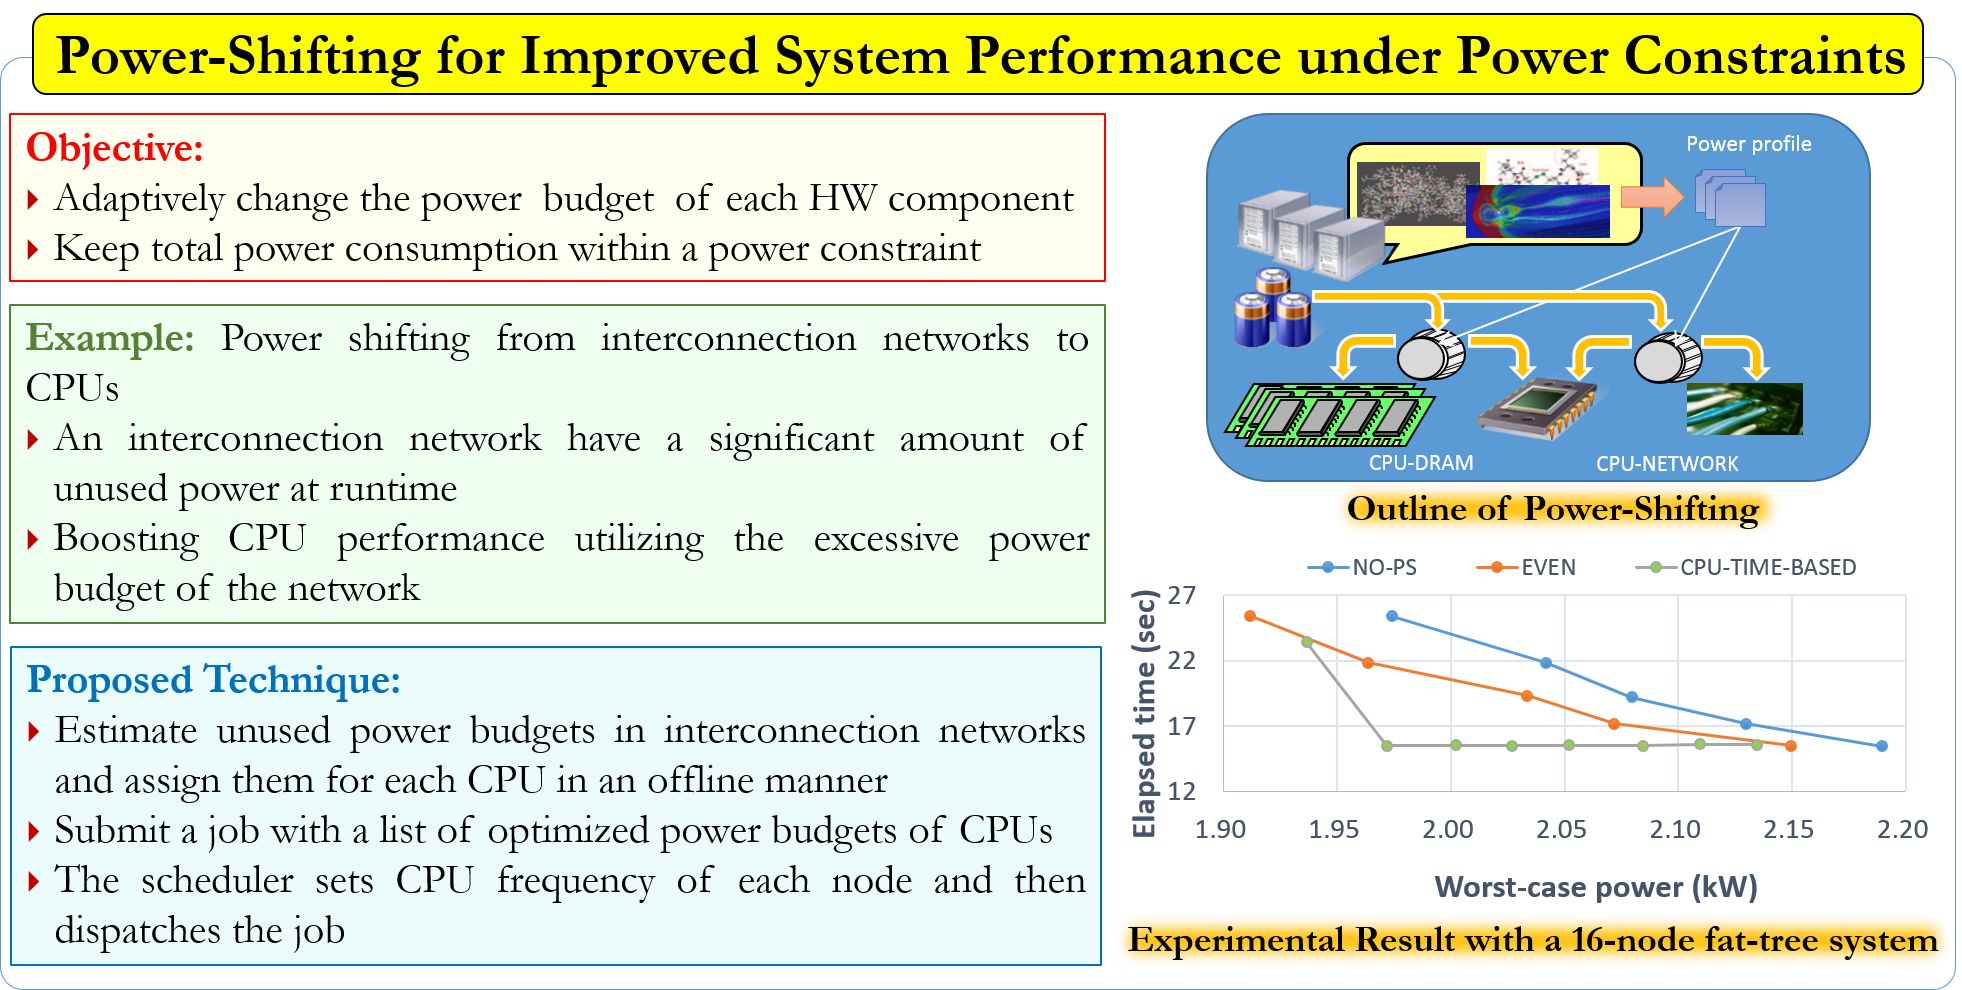 Power shifting for improved system performance under power constraints